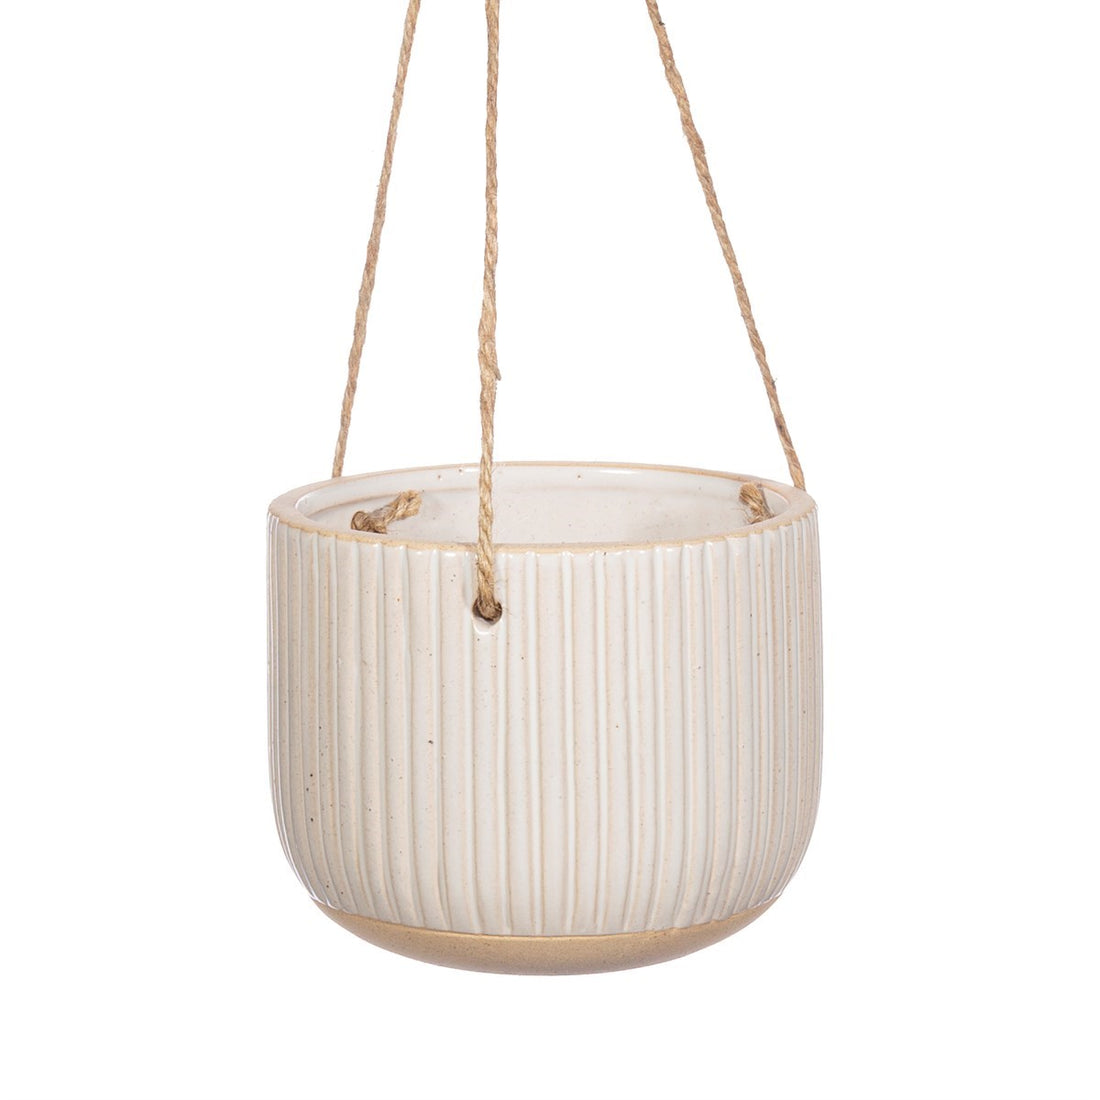 GROOVED STONEWARE HANGING PLANTER | OFF WHITE